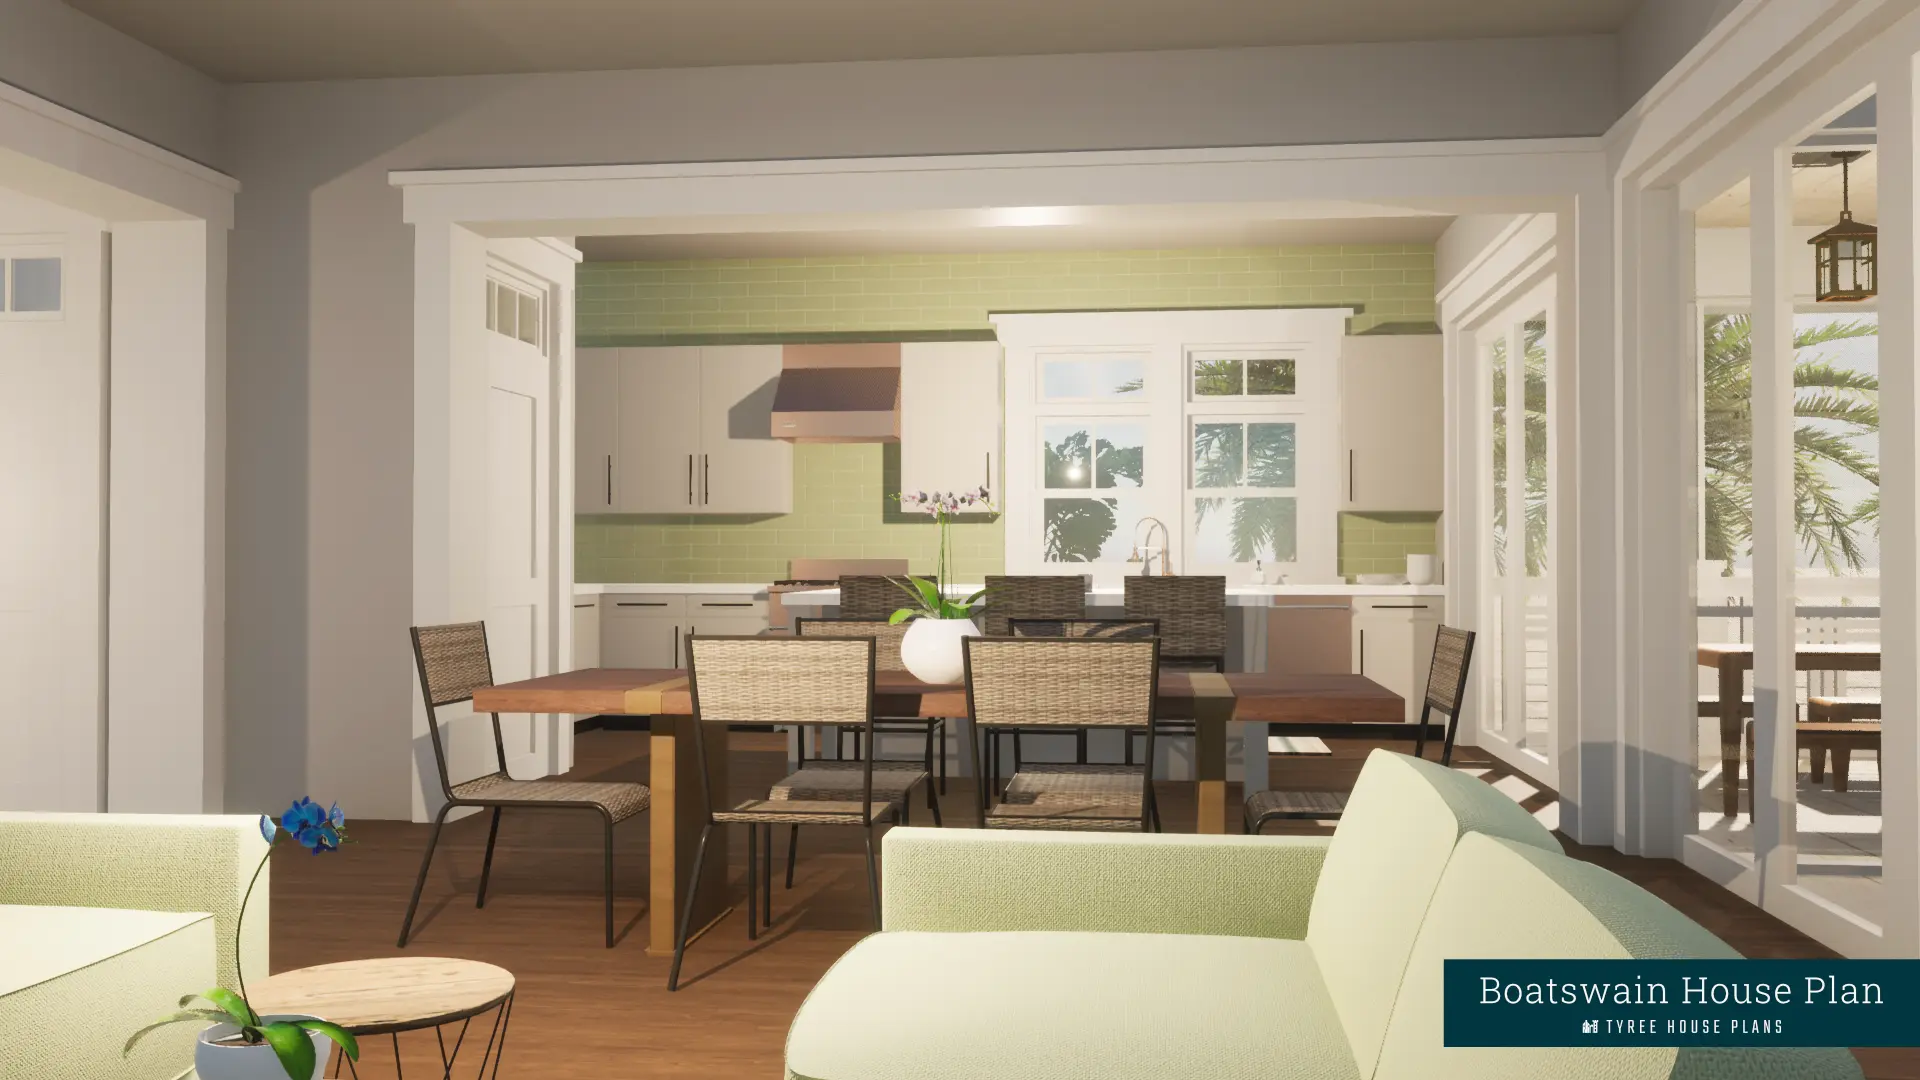 Living room and kitchen beyond. Boatswain by Tyree House Plans.